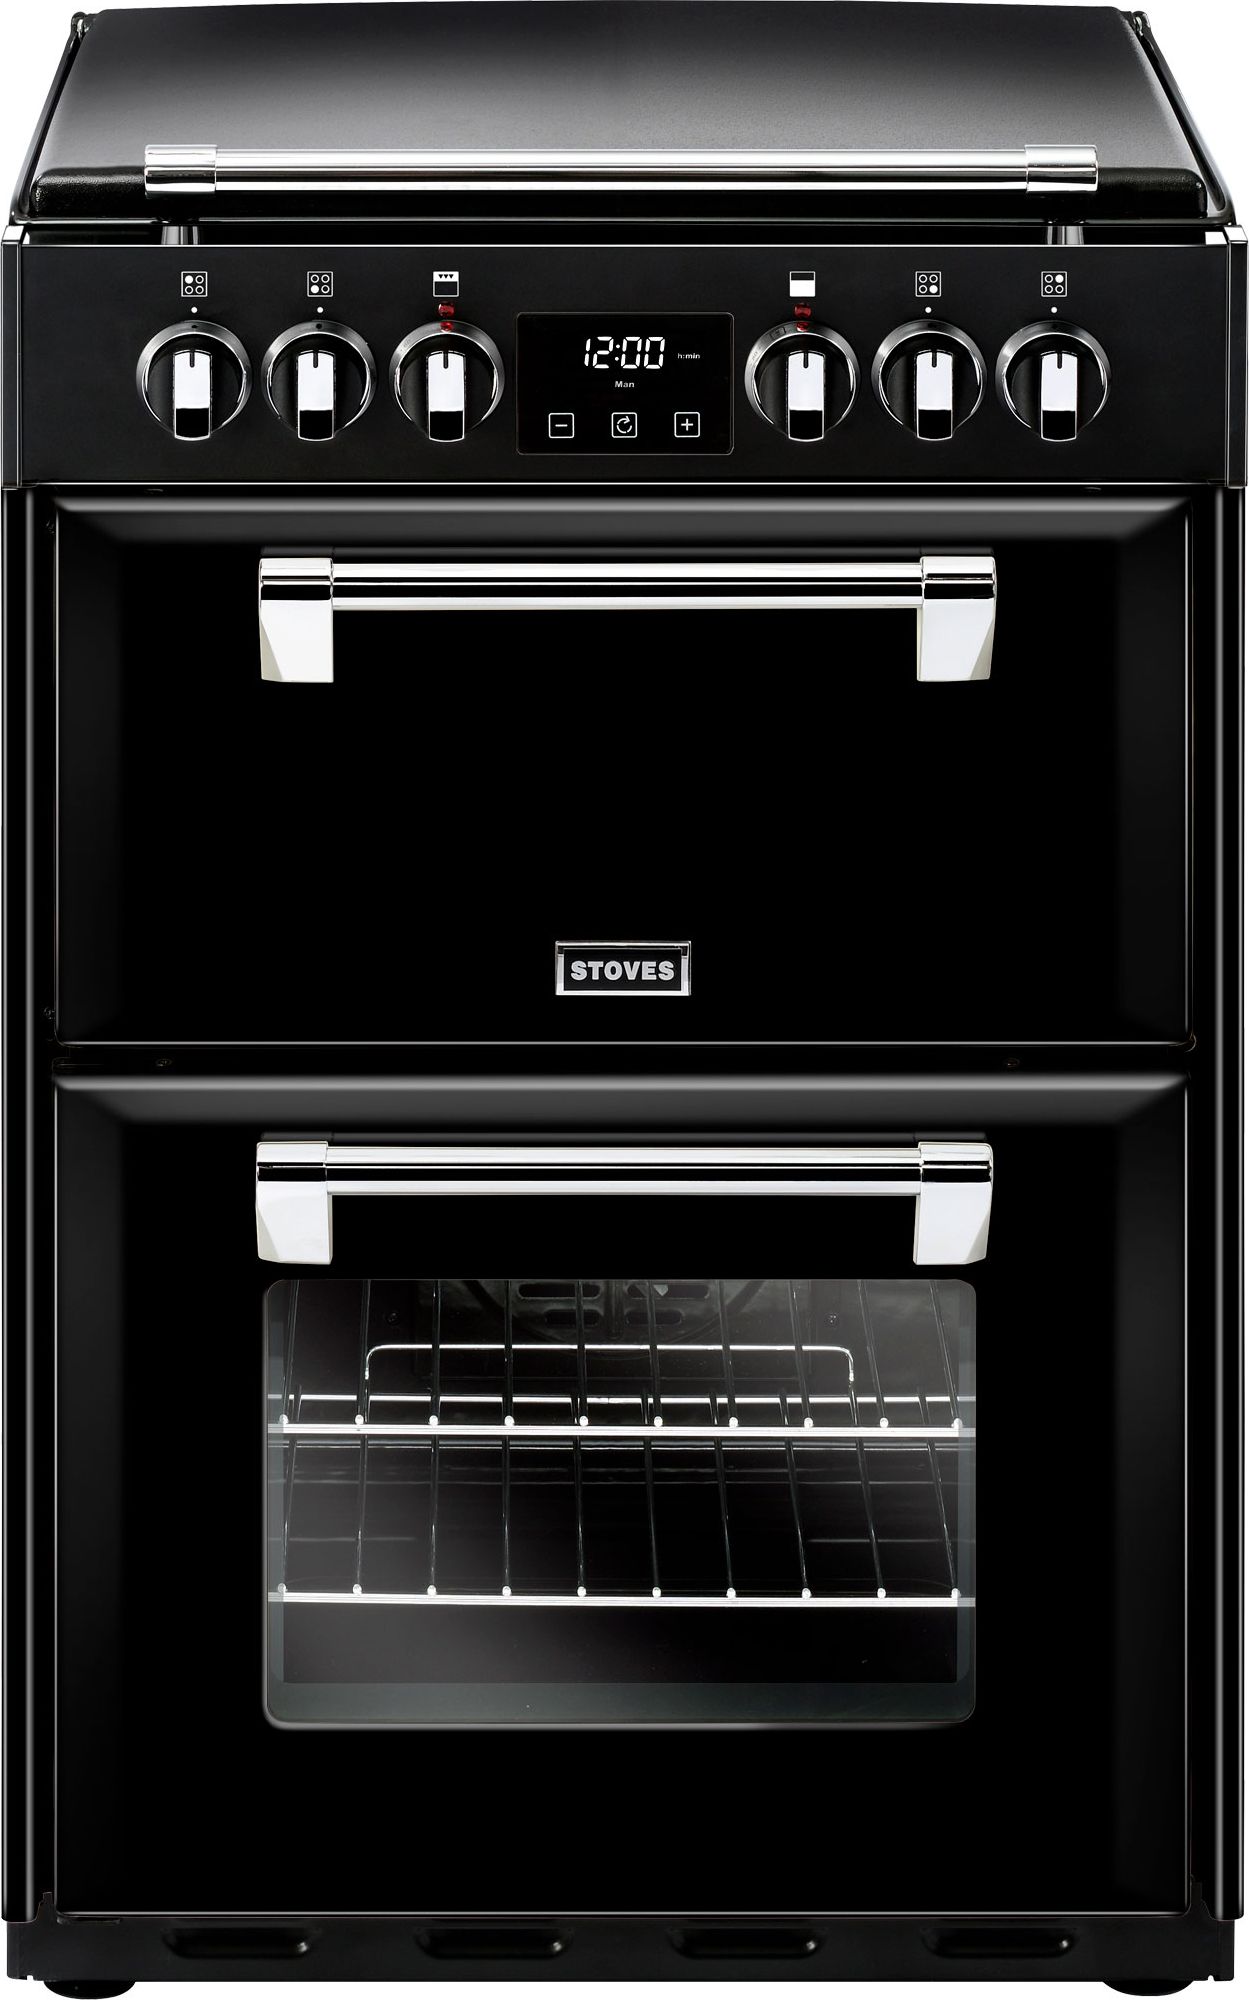 Stoves Richmond600E 60cm Electric Cooker with Ceramic Hob - Black - A/A Rated, Black